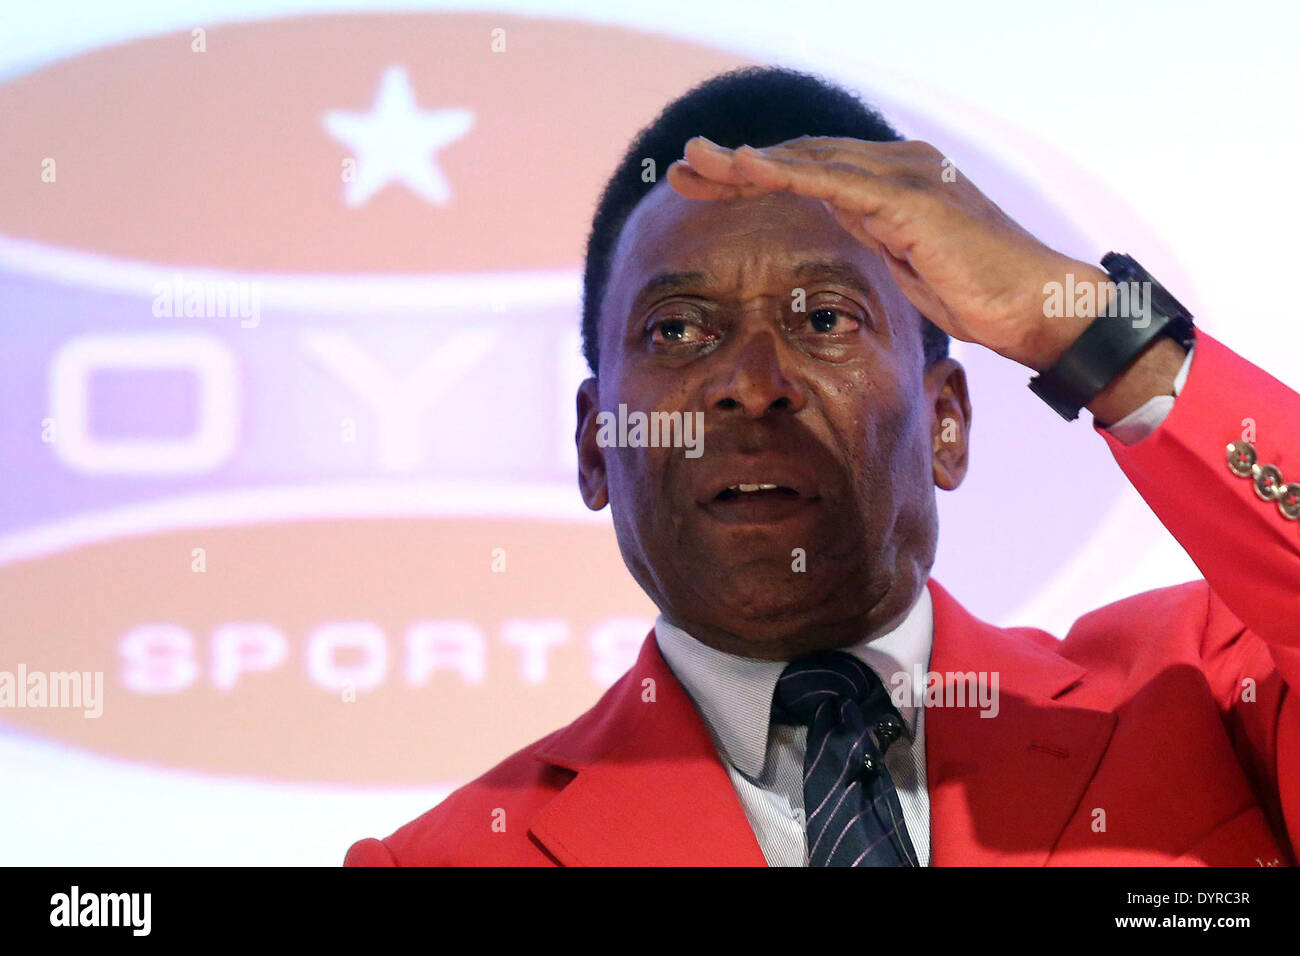 Sao Paulo, Brazil. 24th Apr, 2014. Former soccer player Edson Arantes do Nascimento, better known as Pele, participates in the First Meeting of Sport Management at the Convention Center of Torre Santander, in Sao Paulo, Brazil, on April 24, 2014. © Rahel Patrasso/Xinhua/Alamy Live News Stock Photo